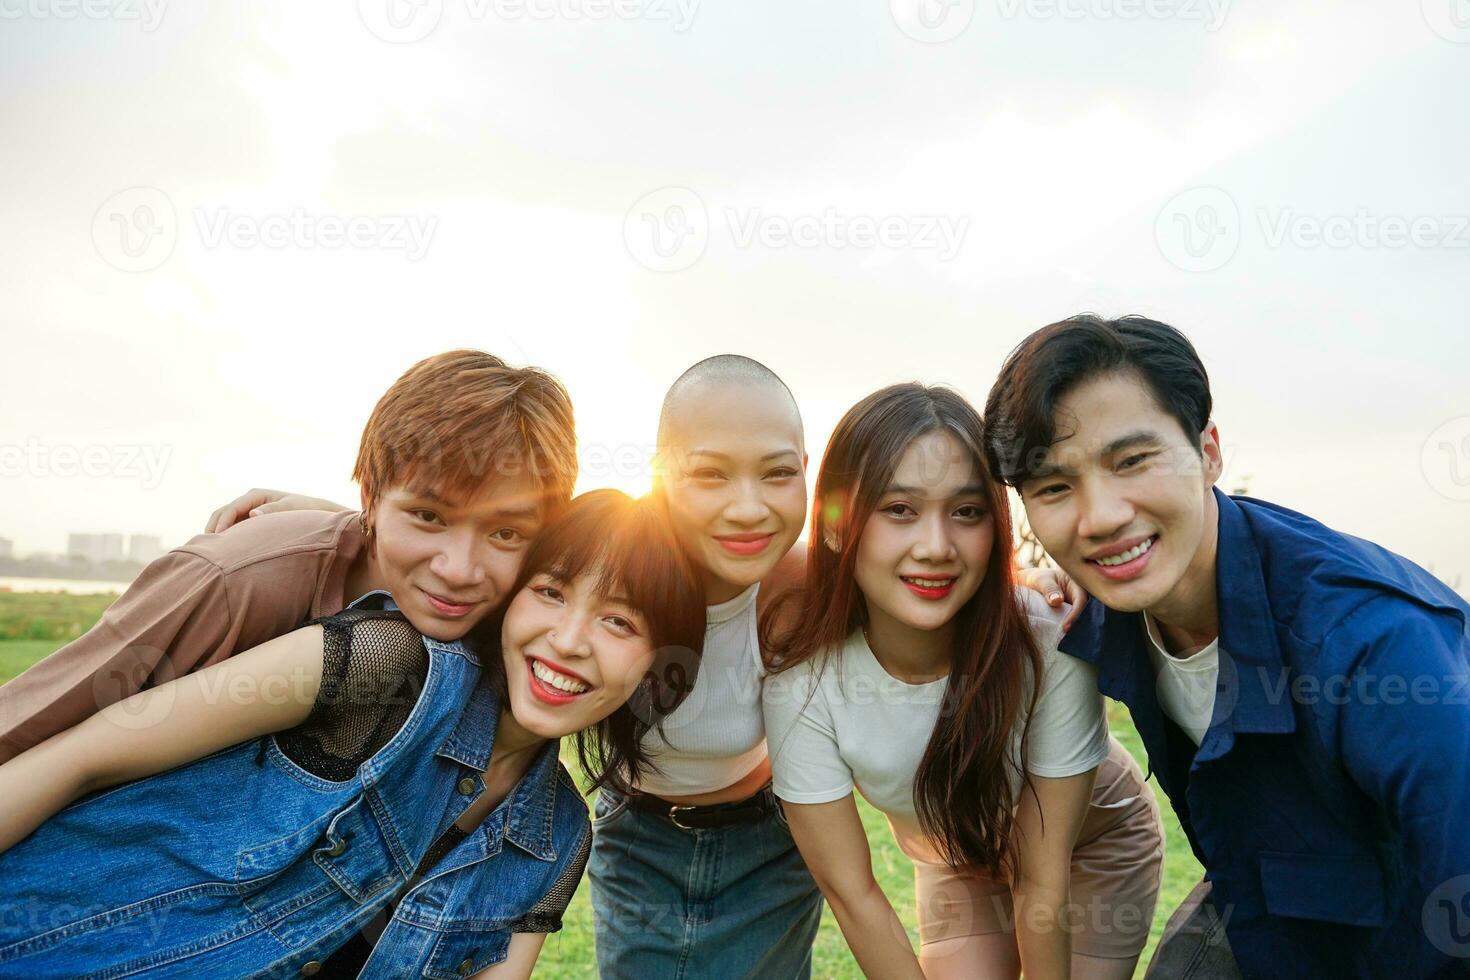 Image of a group of young Asian people laughing happily together photo